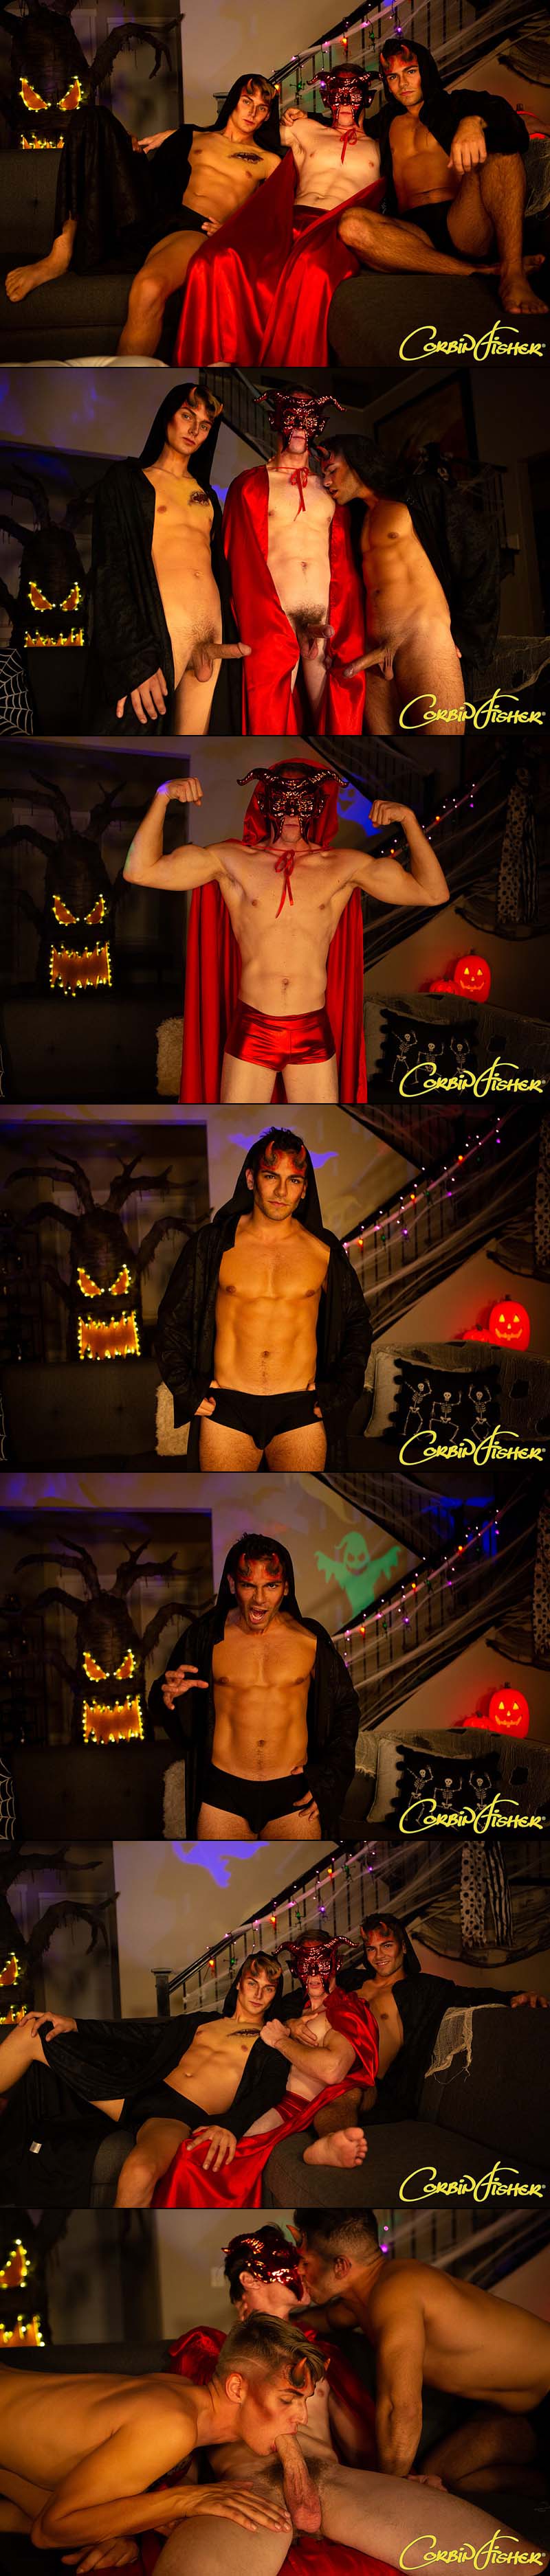 The Devil Wears Nada (Rocky Returns Gets Tag-Teamed by Roman and Kyler) at CorbinFisher